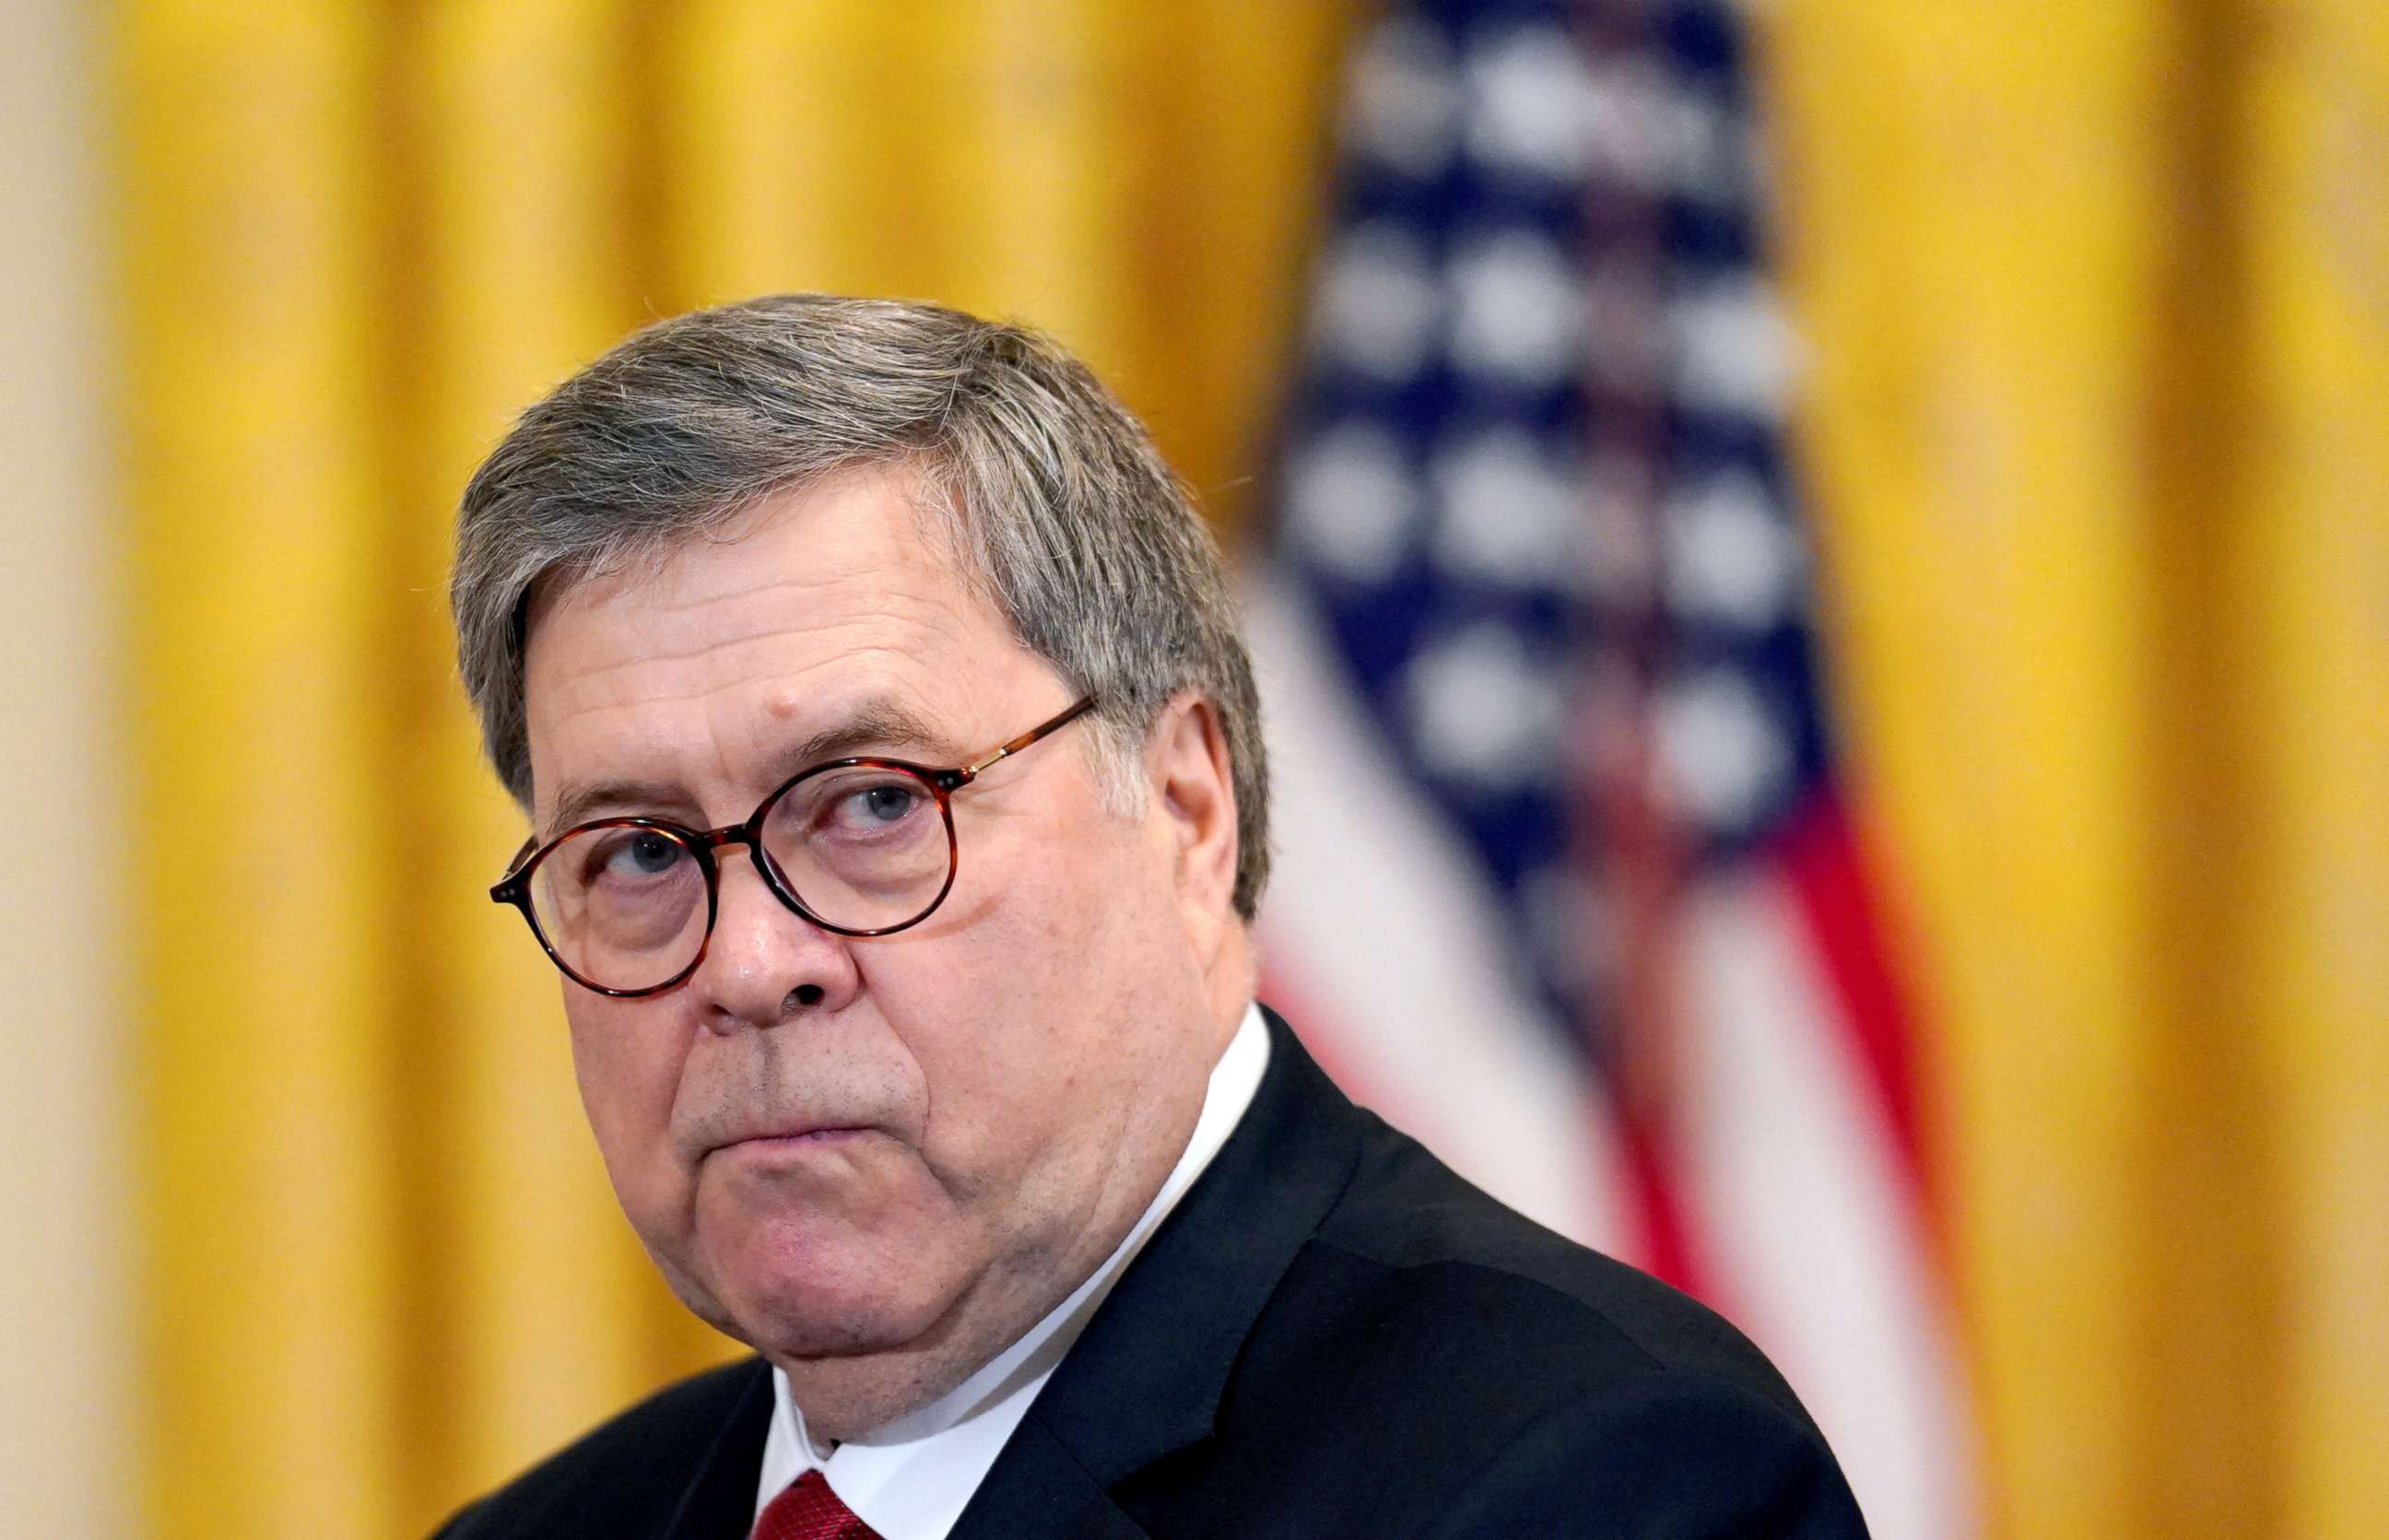 PHOTO: Attorney General William Barr takes part in the "2019 Prison Reform Summit" in the East Room of the White House in Washington, April 1, 2019.